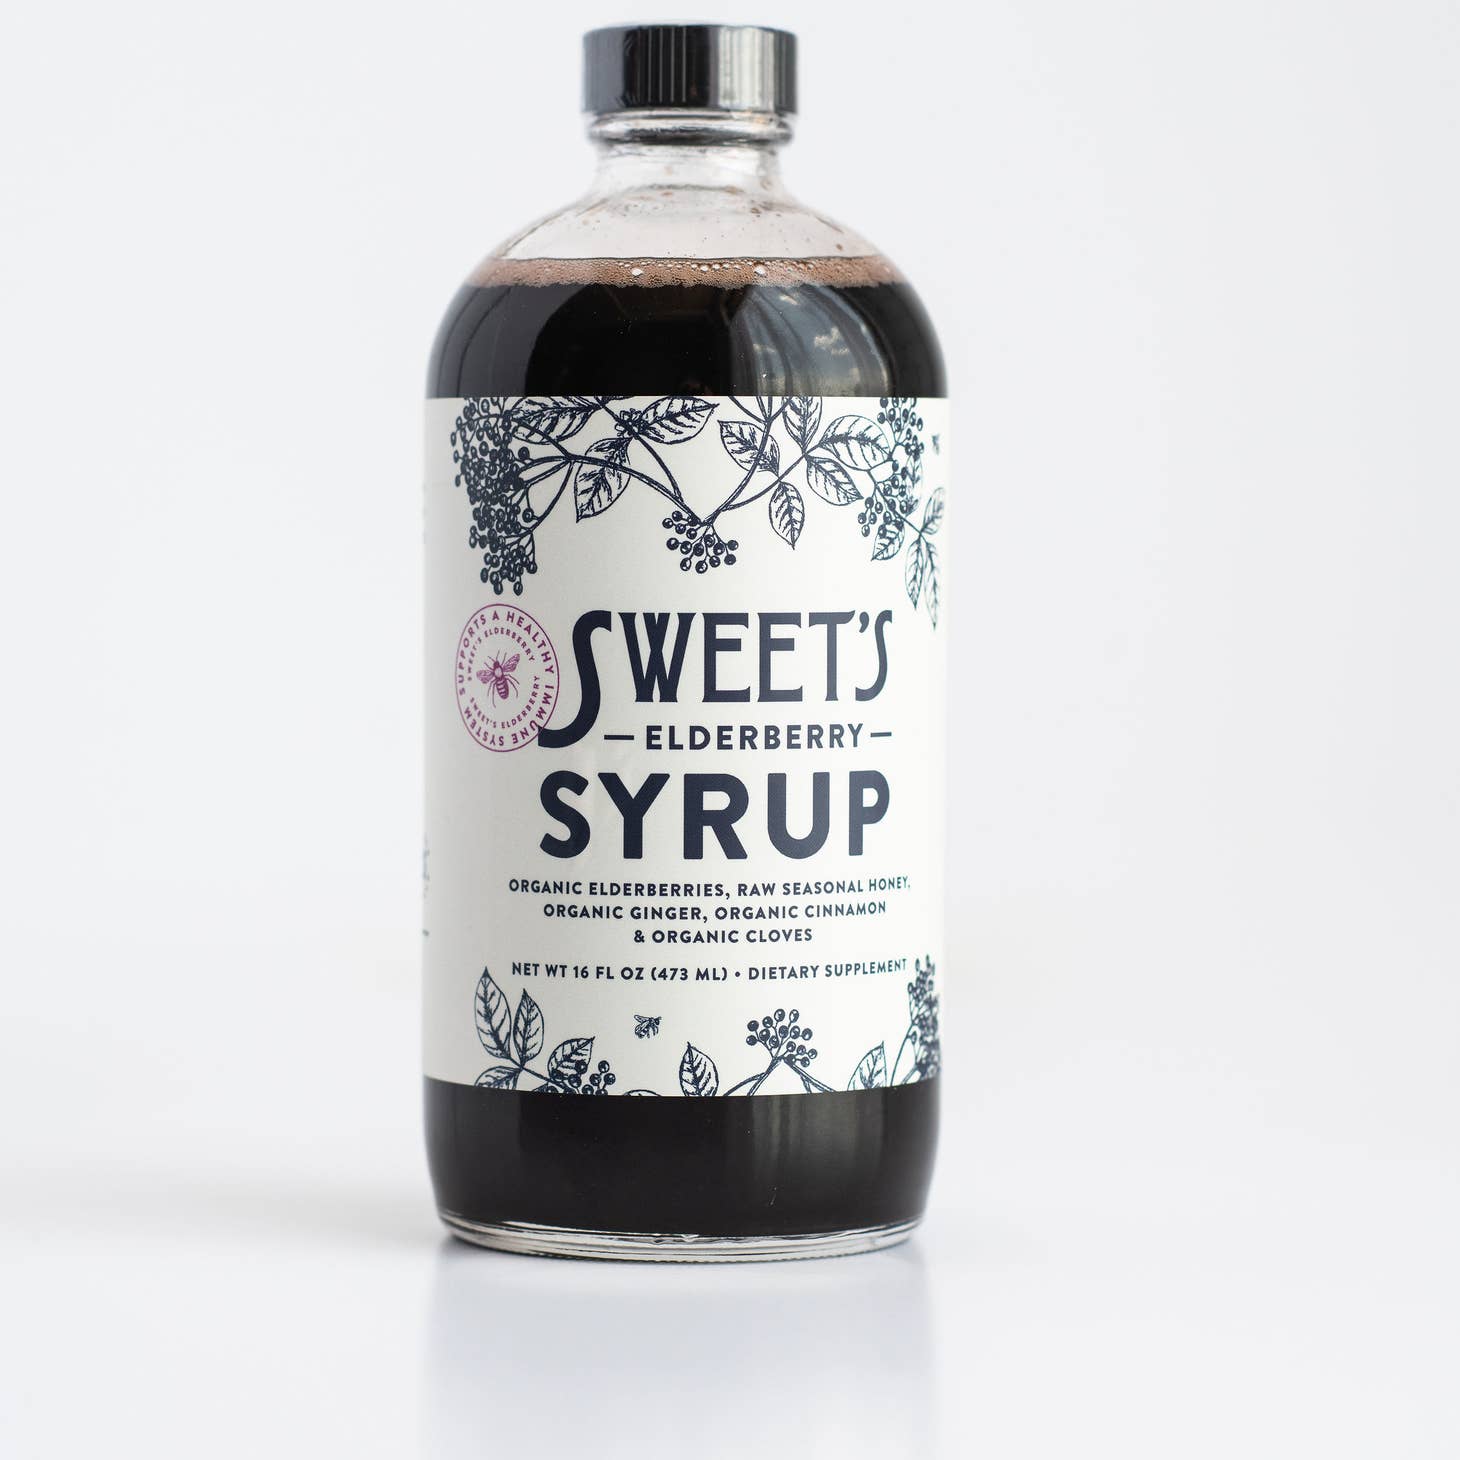 Sweets Elderberry Syrup